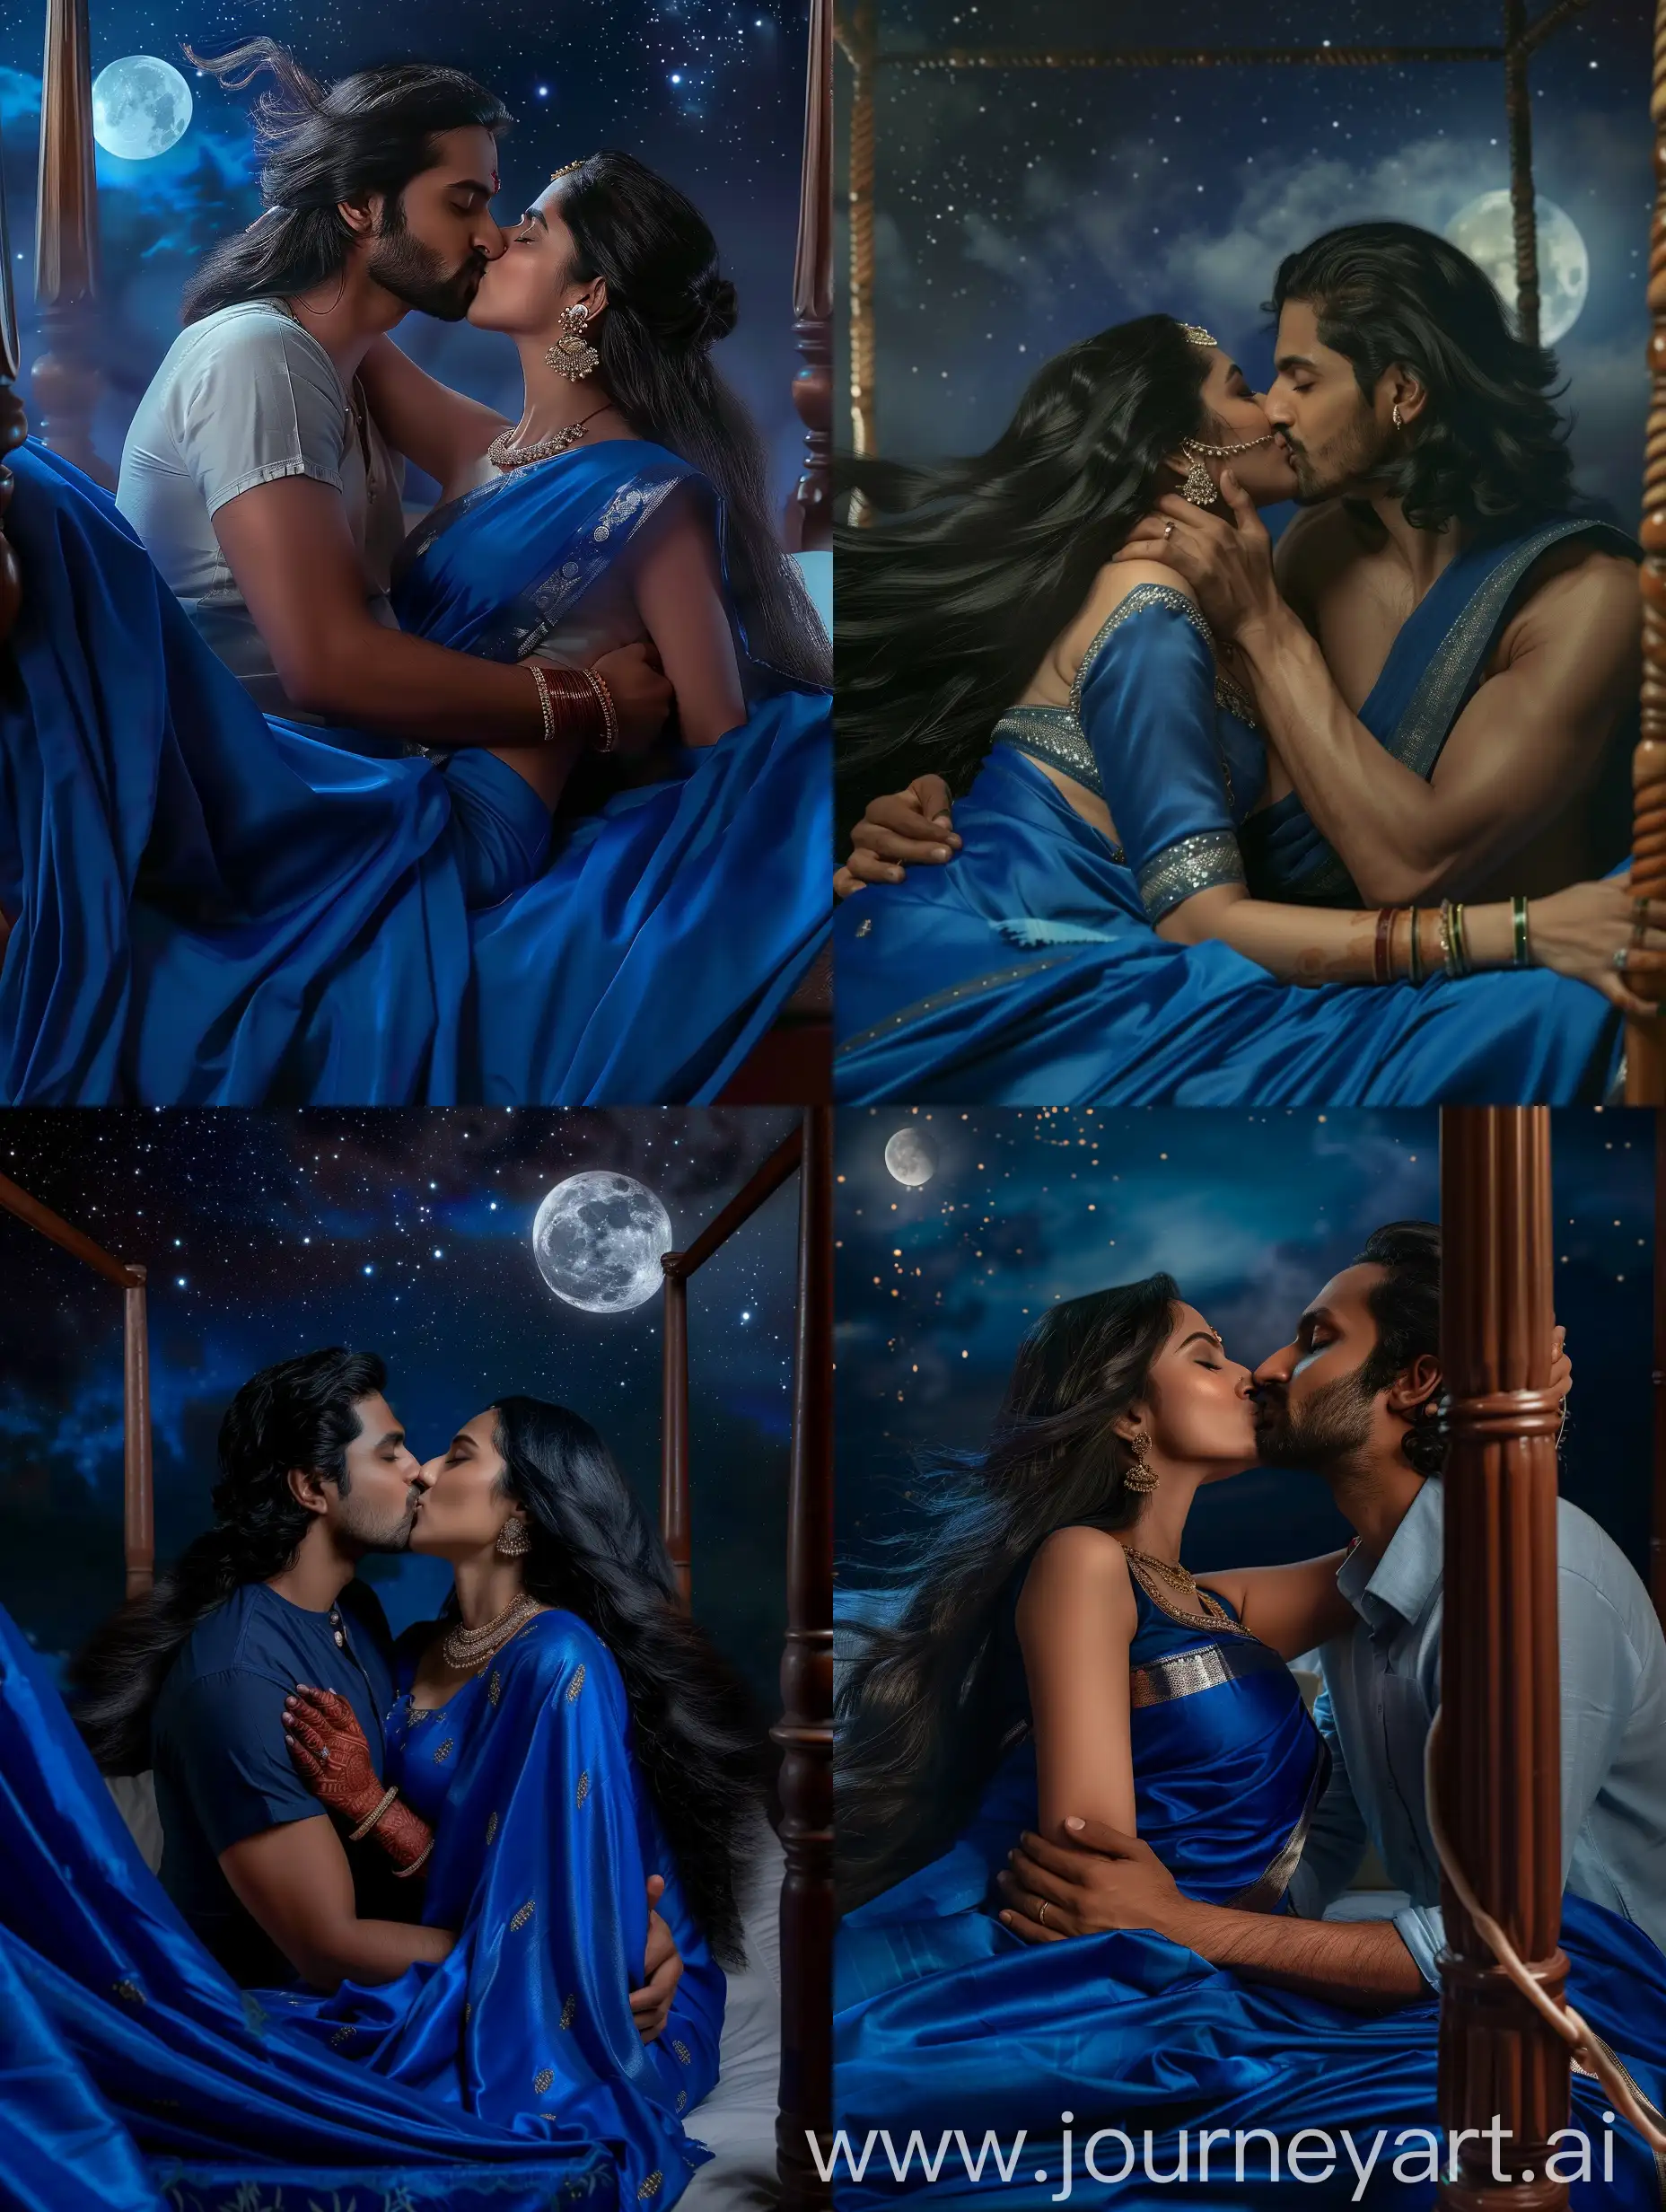 realisticof a romantic couple with adjusted capture moment angle, passionately kissing and tenderly embracing, lying on a four poster bed, featuring a woman in a blue sari with long, straight, black, shiny hair, embodying traditional beauty, styled in an elegant enga fashion, showcasing the allure of a supermodel with detailed, flowing locks, bathing in romance, romantic night background theme, looking like Tamil movie stars, with stars and moonlight in the background, without earrings for the man, in extra wide angle shots, quality 8k, full body shot, with their eyes locked on each other, and the woman's sari billowing gently in the breeze, with her hair slightly windswept, with more passionate expressions, and their hands placed for more intimacy, with their lips slightly parted, reminiscent of Raja Ravi Varma’s style